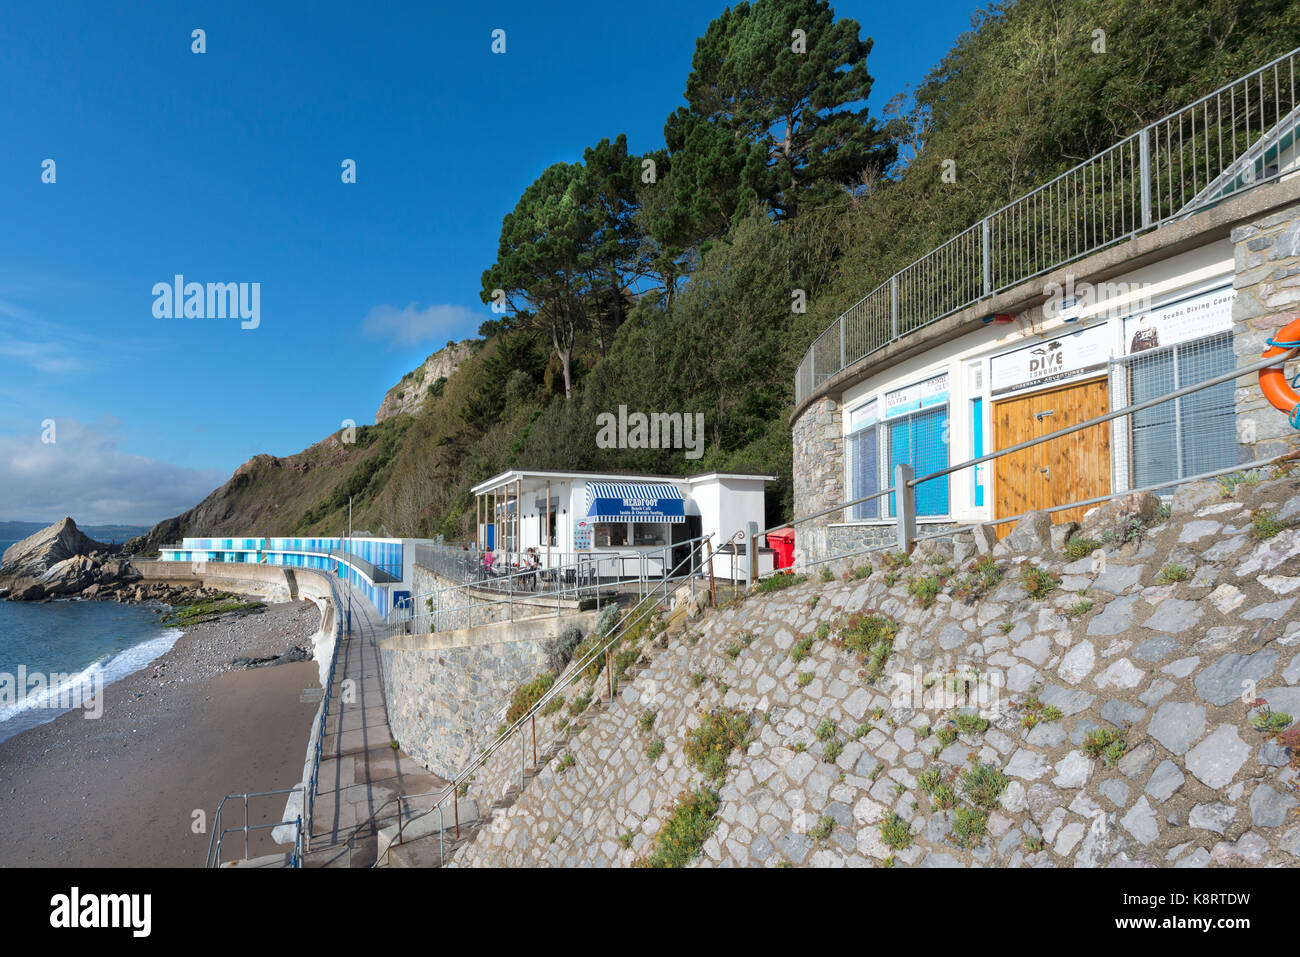 Meadfoot Beach Cafe and Dive Centre - Torquay, Devon - UK Stock Photo